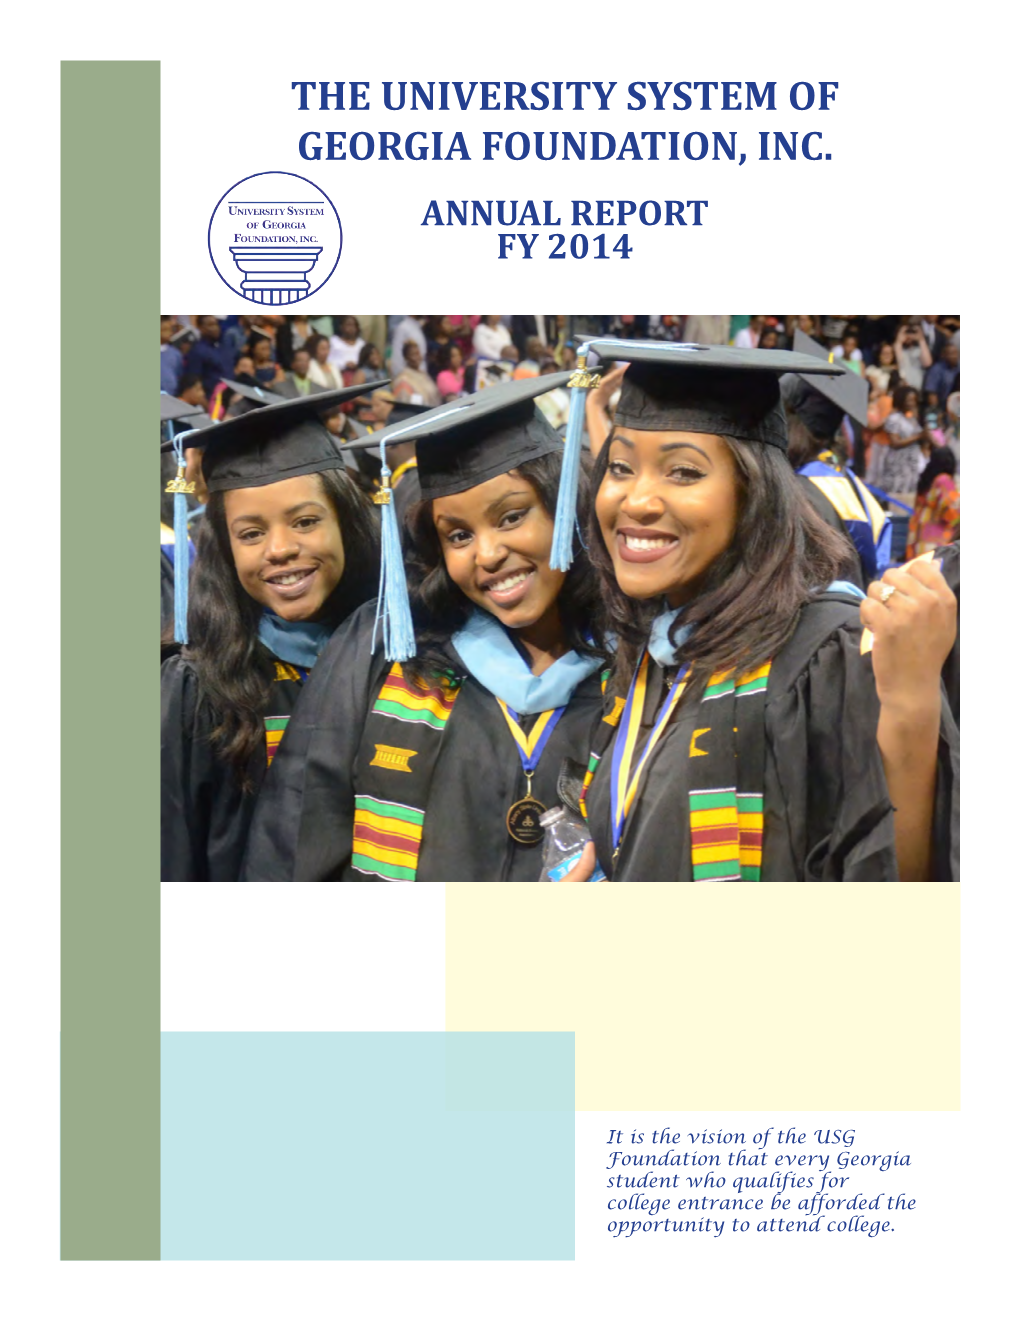 The University System of Georgia Foundation, Inc. Annual Report Fy 2014